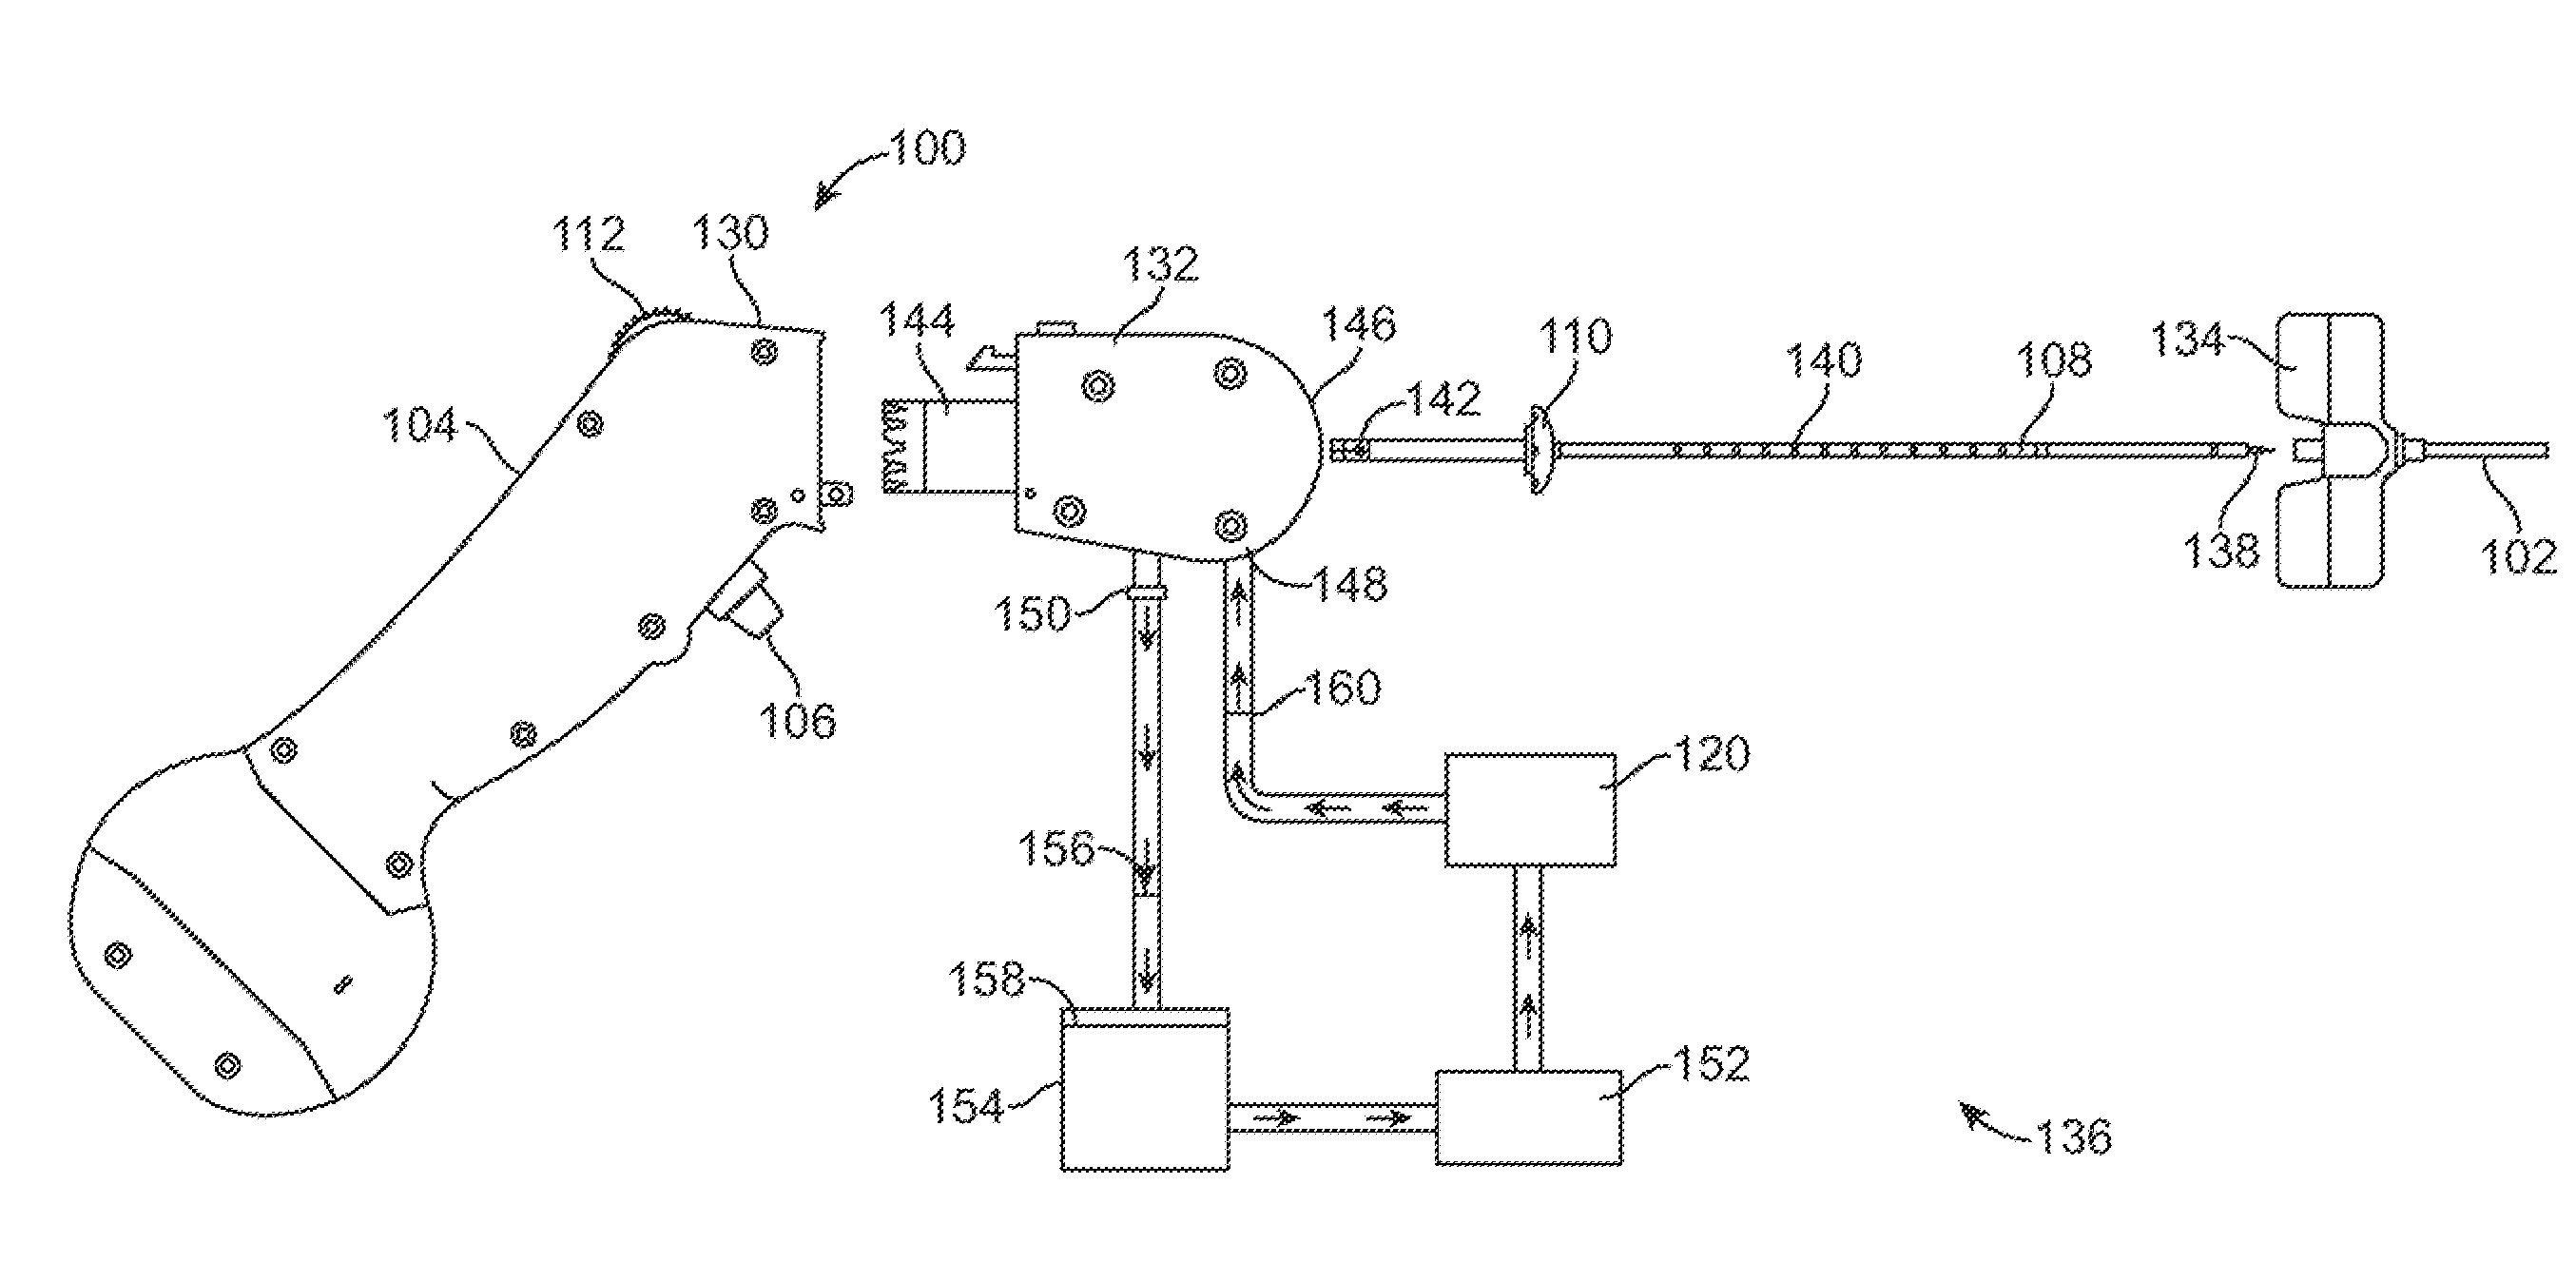 Apparatus and methods for tissue disruption